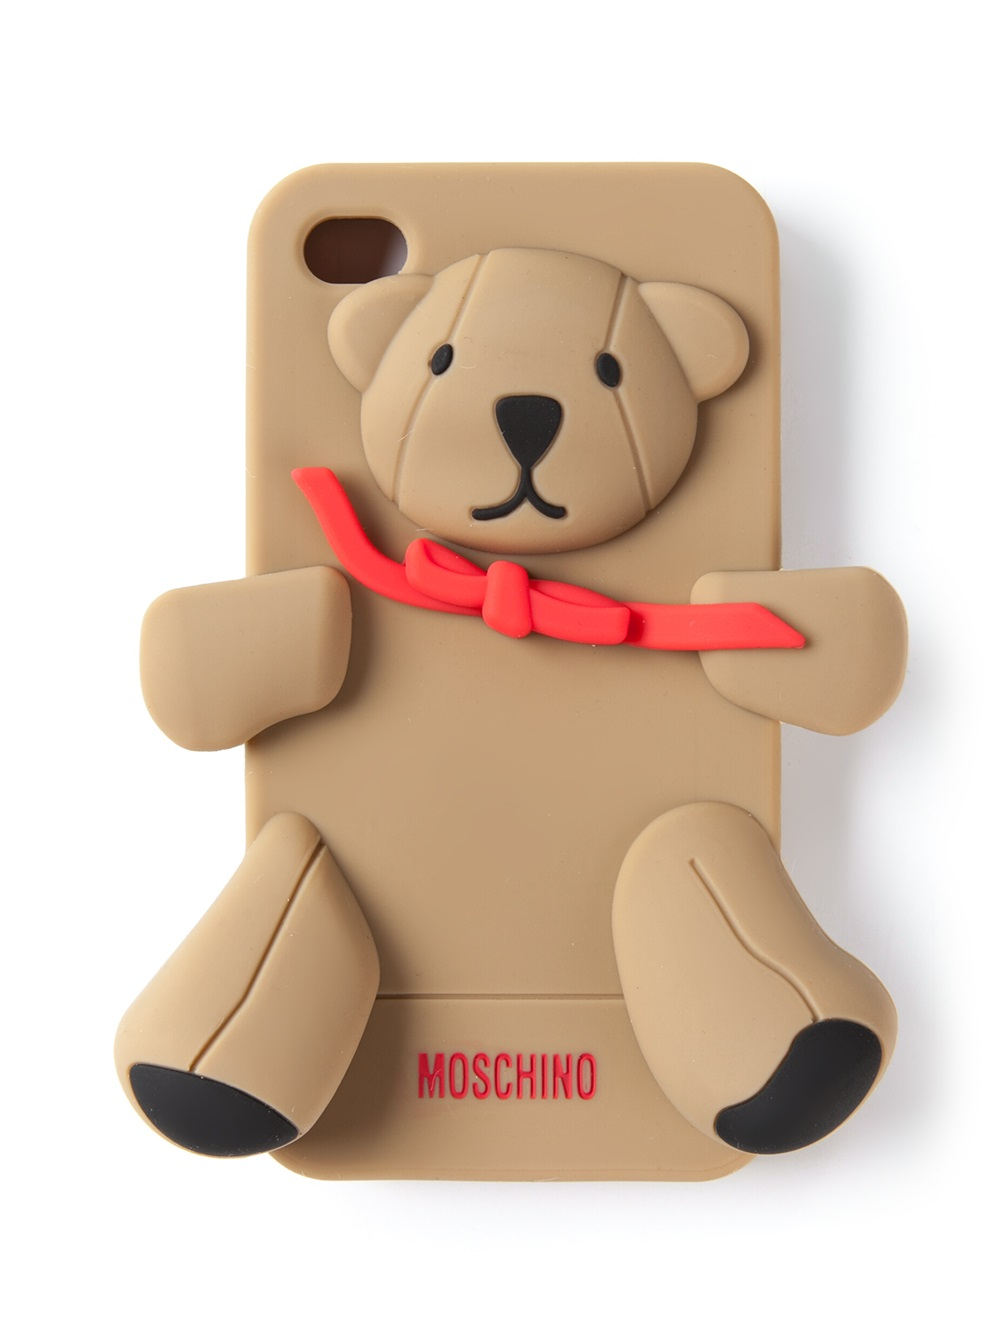 Moschino Teddy Bear Iphone 5s Case in 